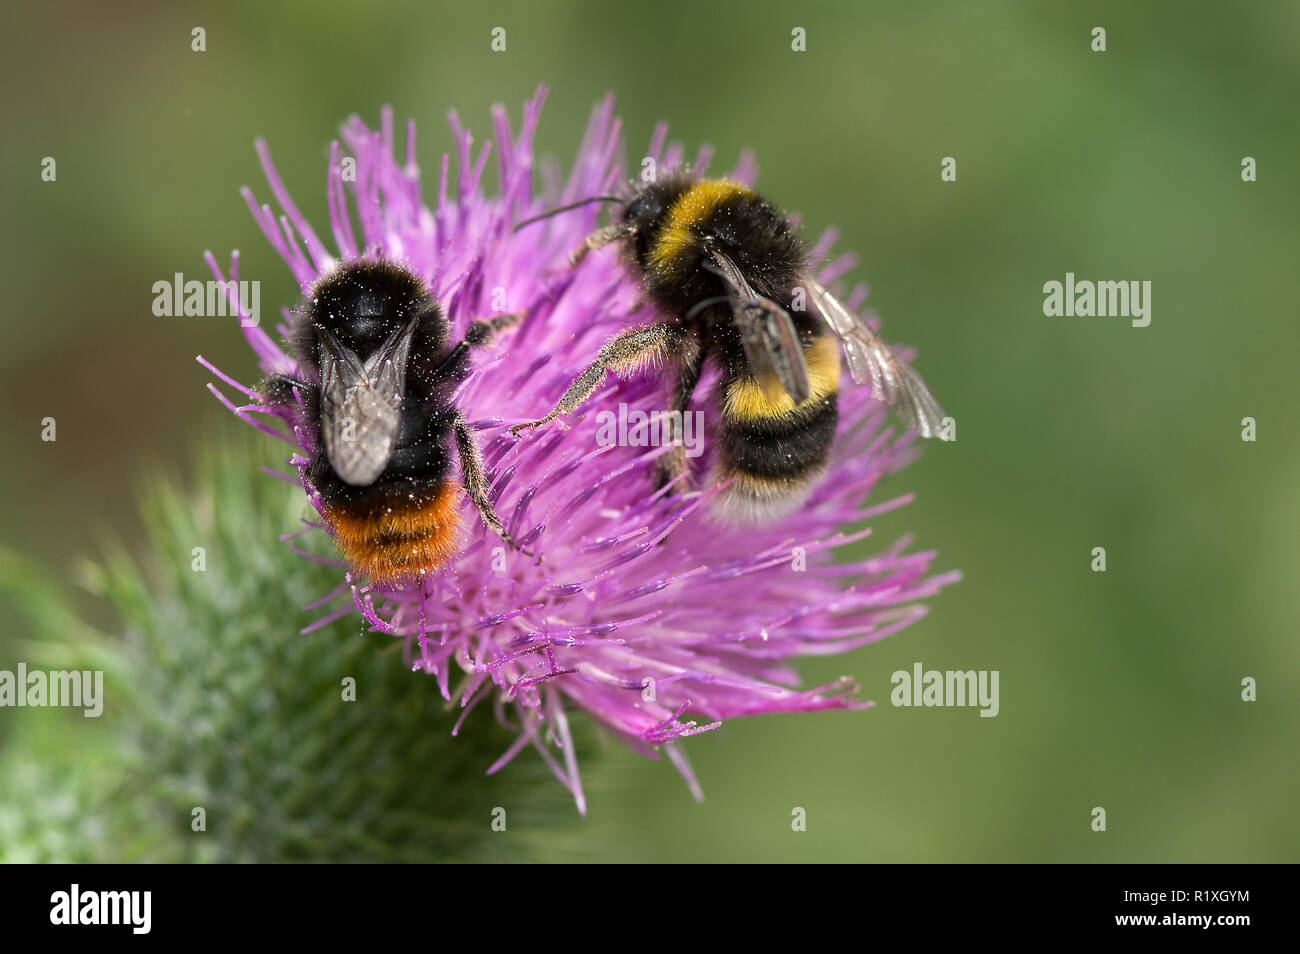 Buff-tailed Bumble Bee (Bombus terrestris) and Red-tailed Bumblebee (Bombus lapidarius) drinking nectar from a flower of a Bull Thistle (Cirsium vulgare). Germany Stock Photo